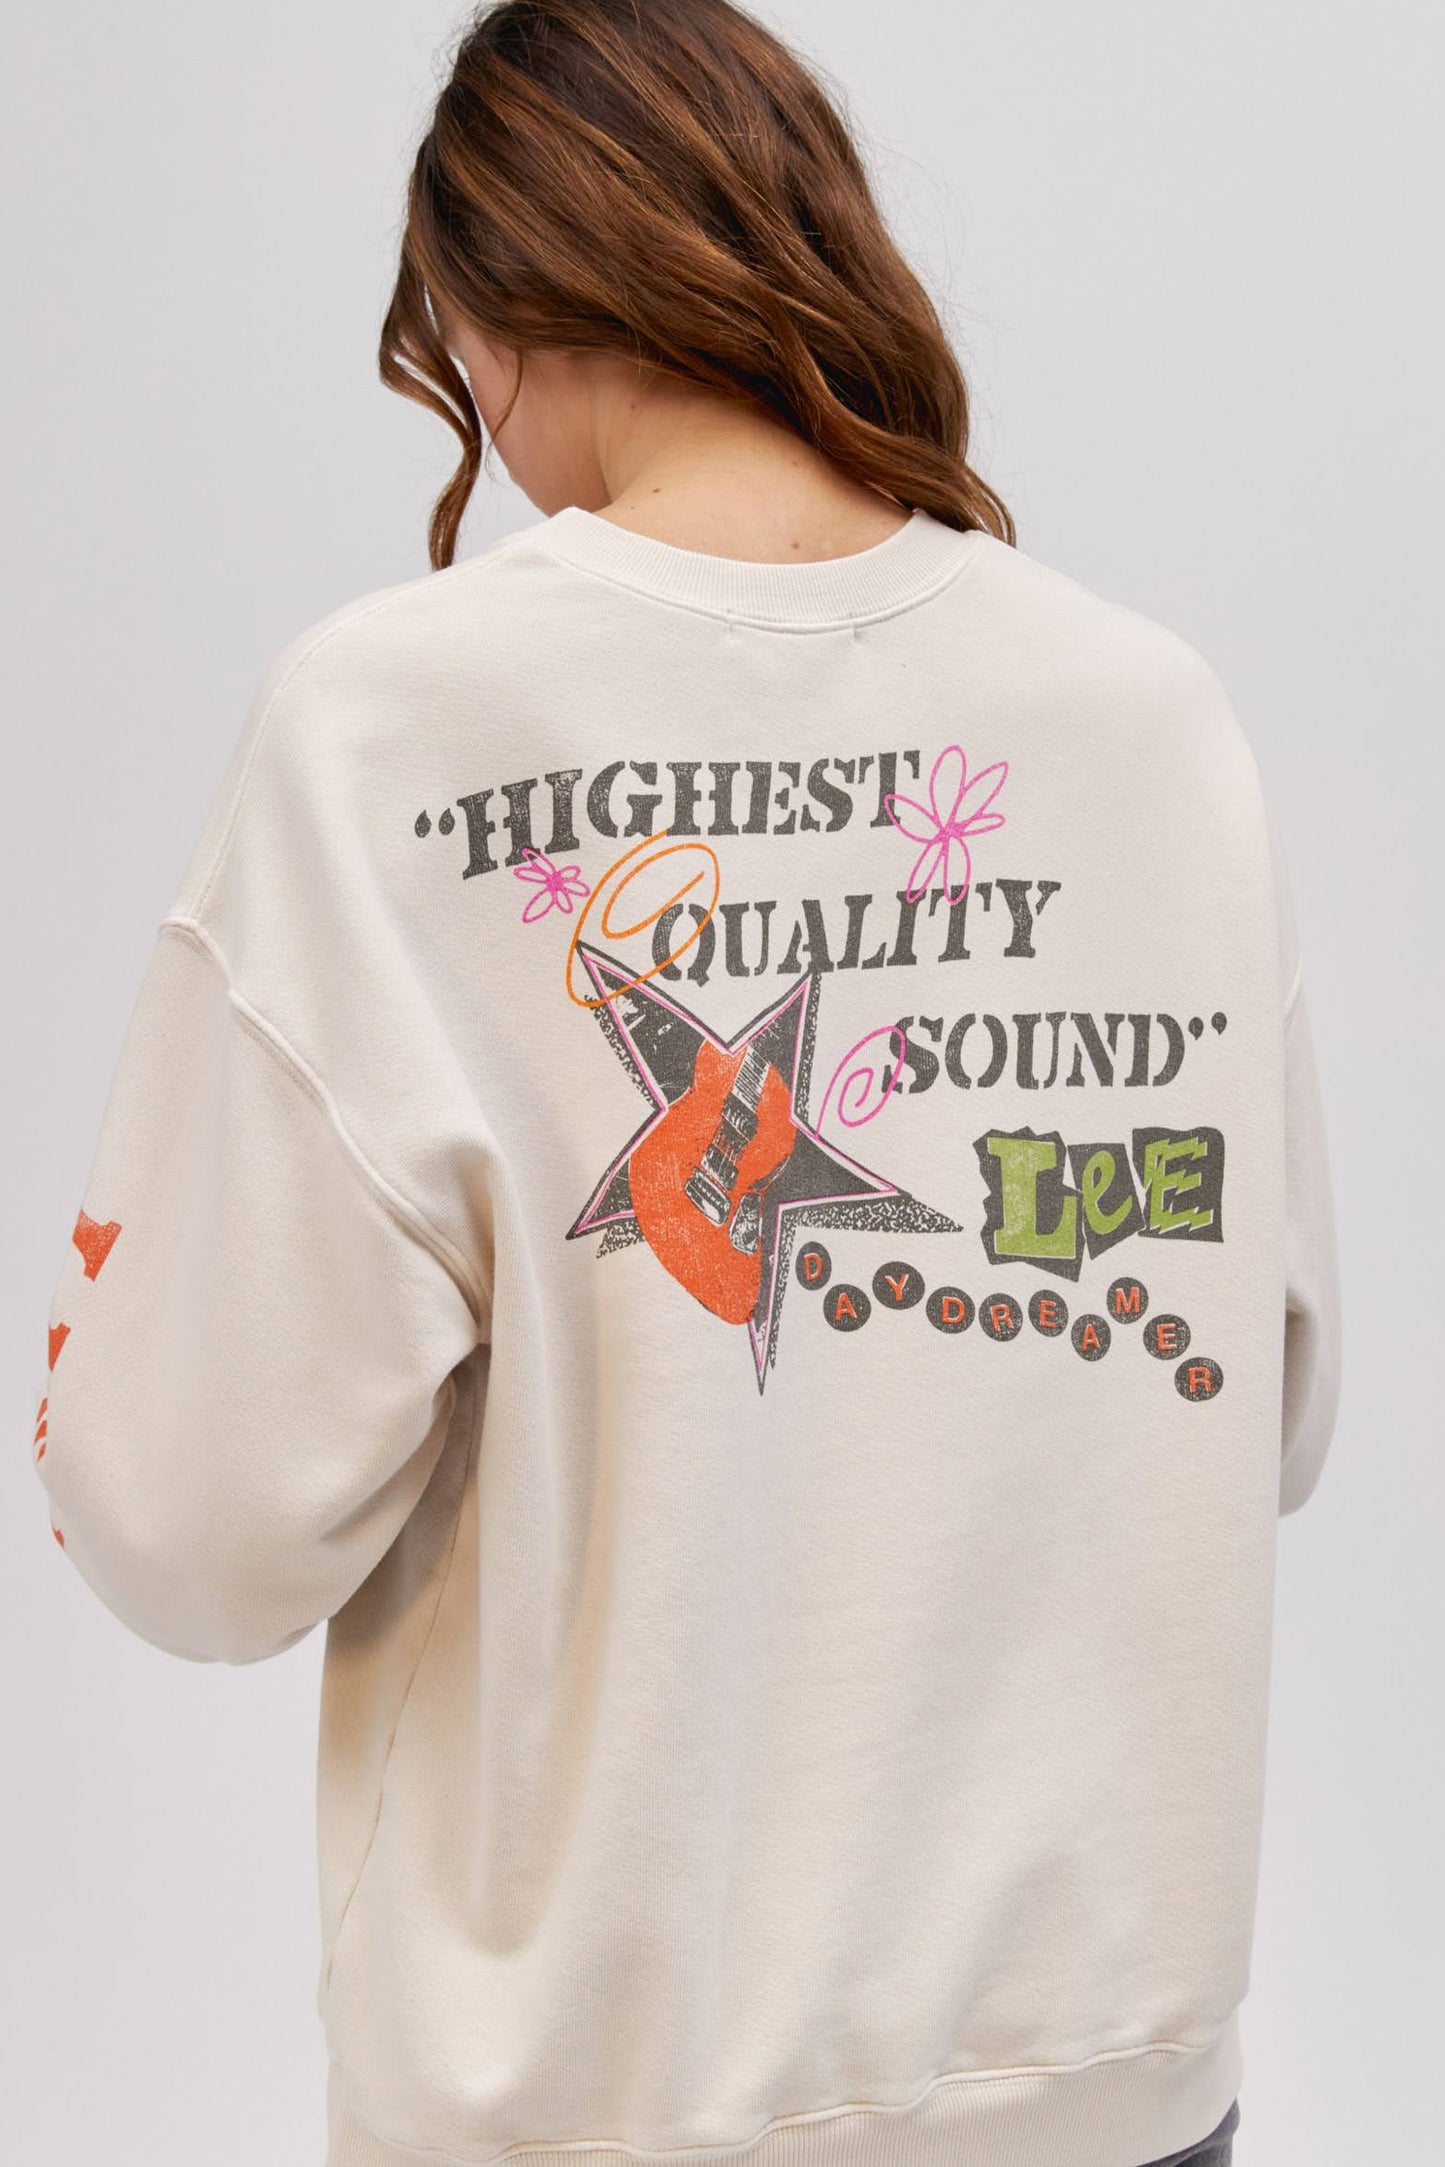 backside of model wearing an off white colored sweatshirt with graphic designs